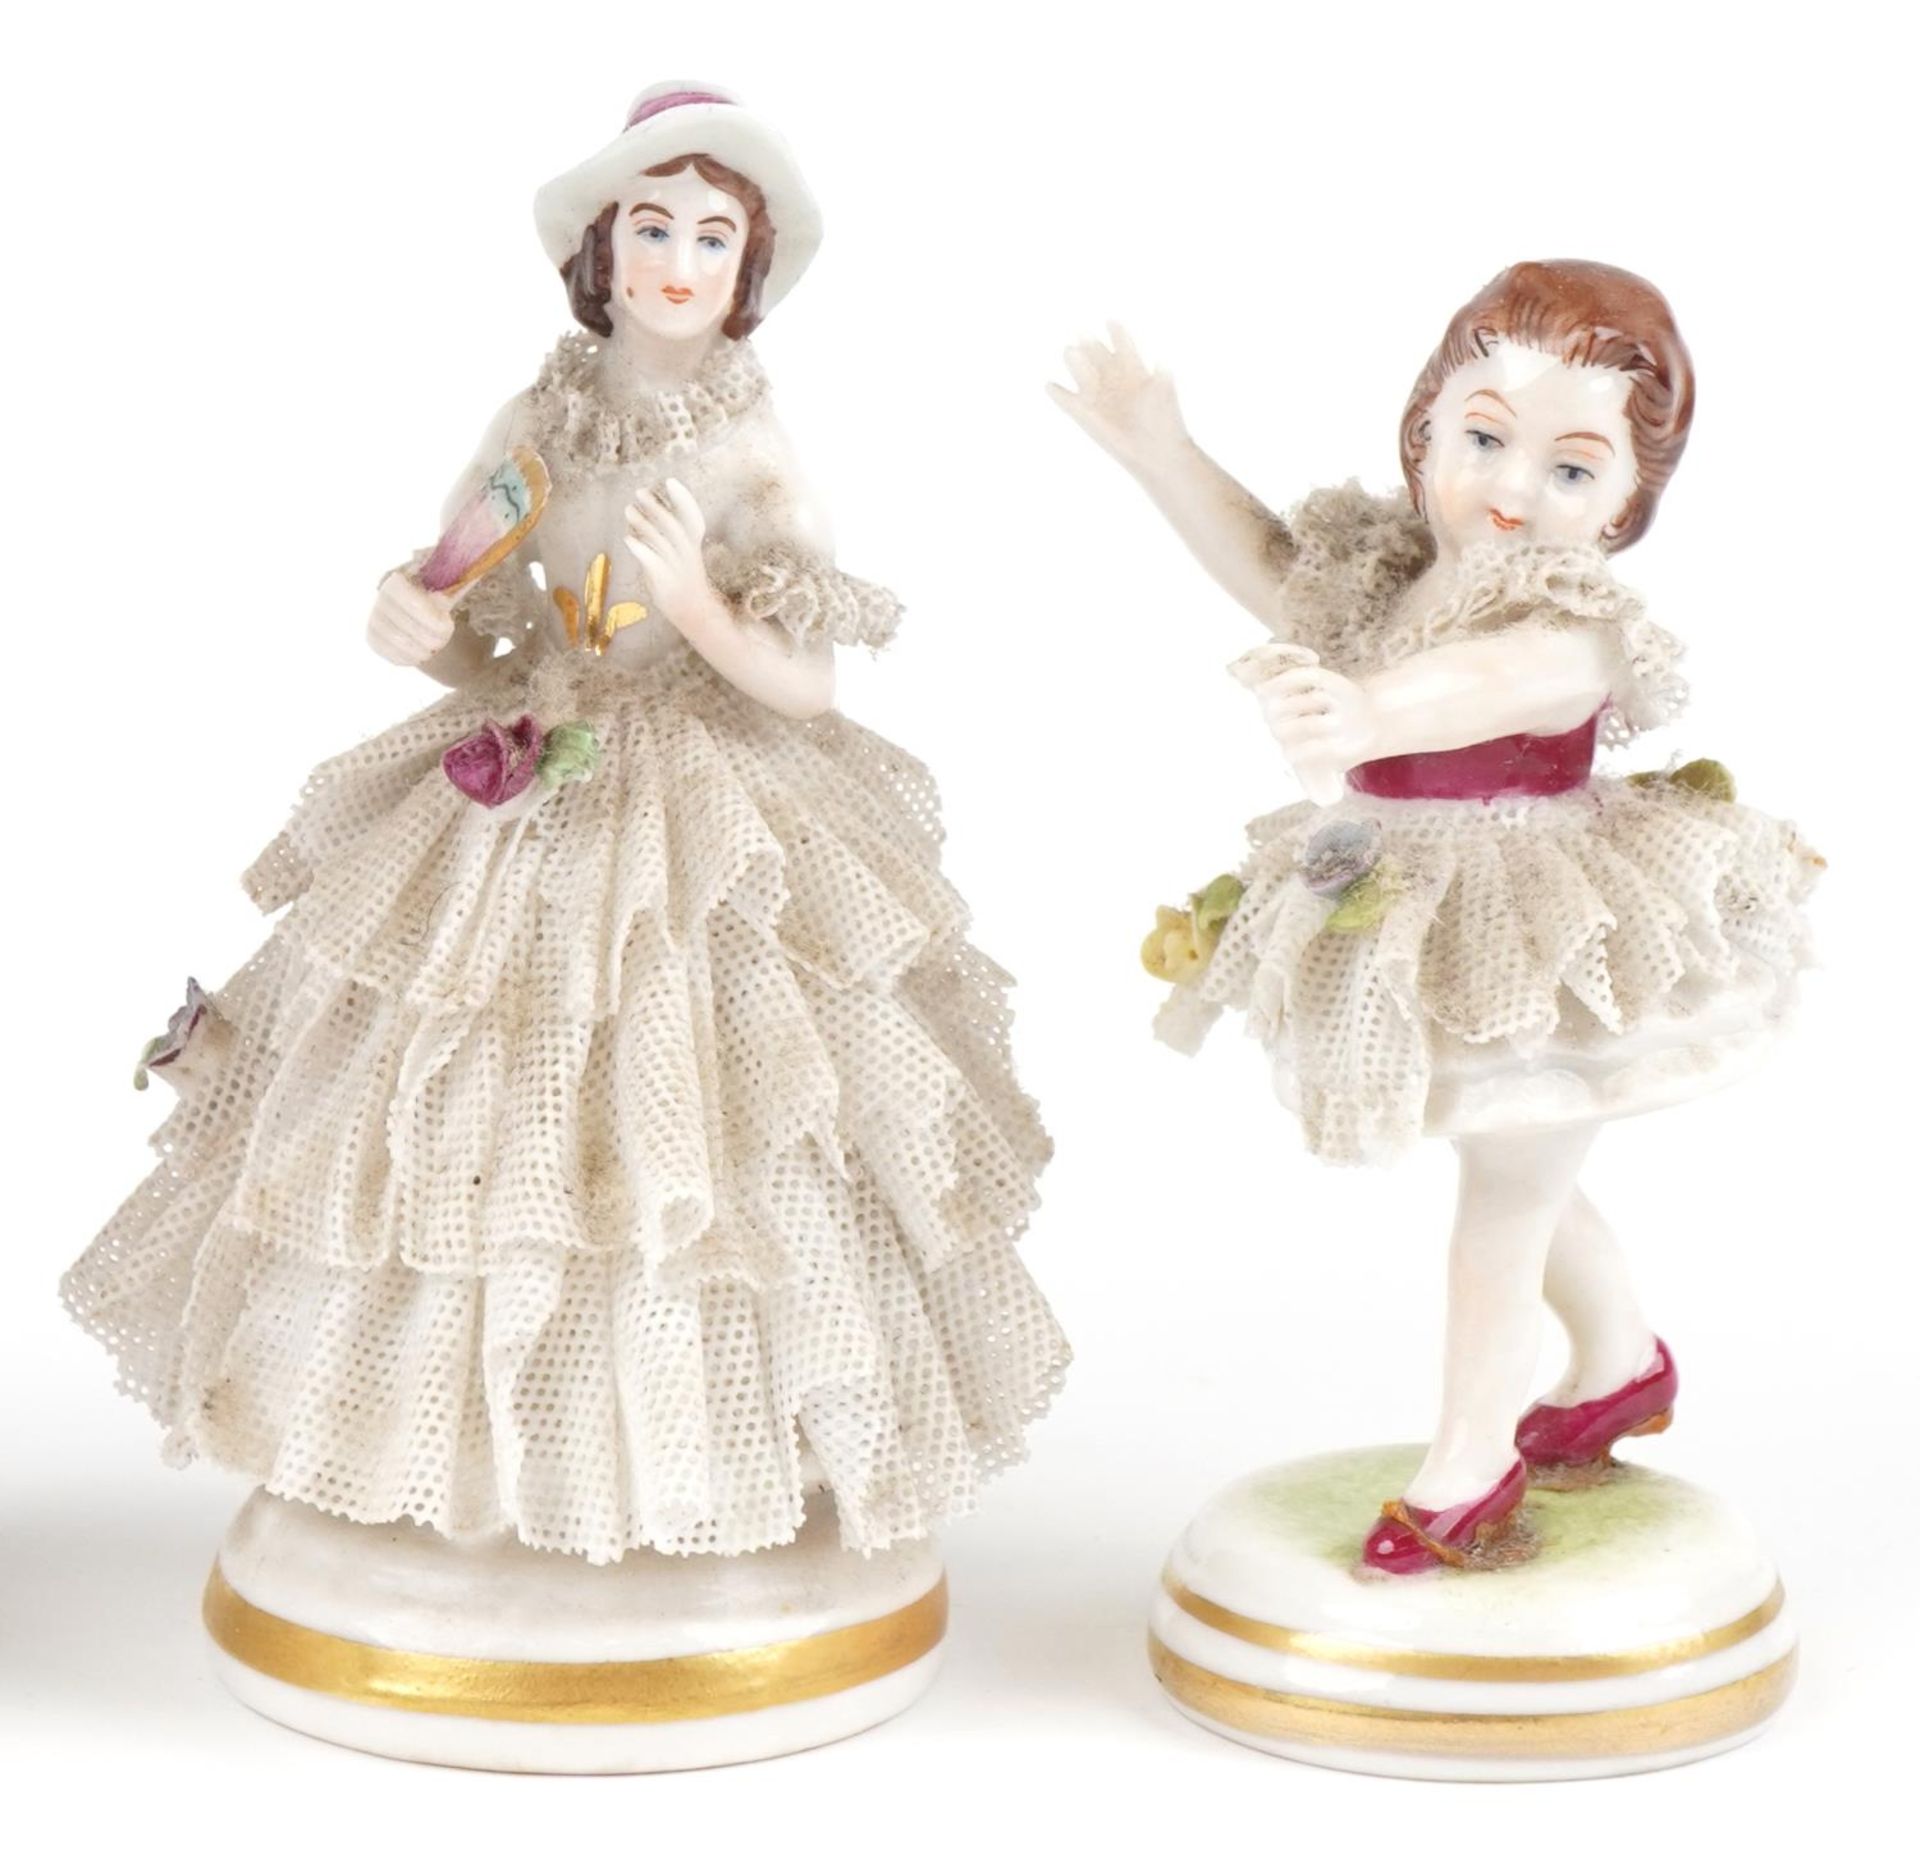 Collectable china including pair of Dresden lace figurines and a Hungarian figurine by Hollohaza, - Image 3 of 5